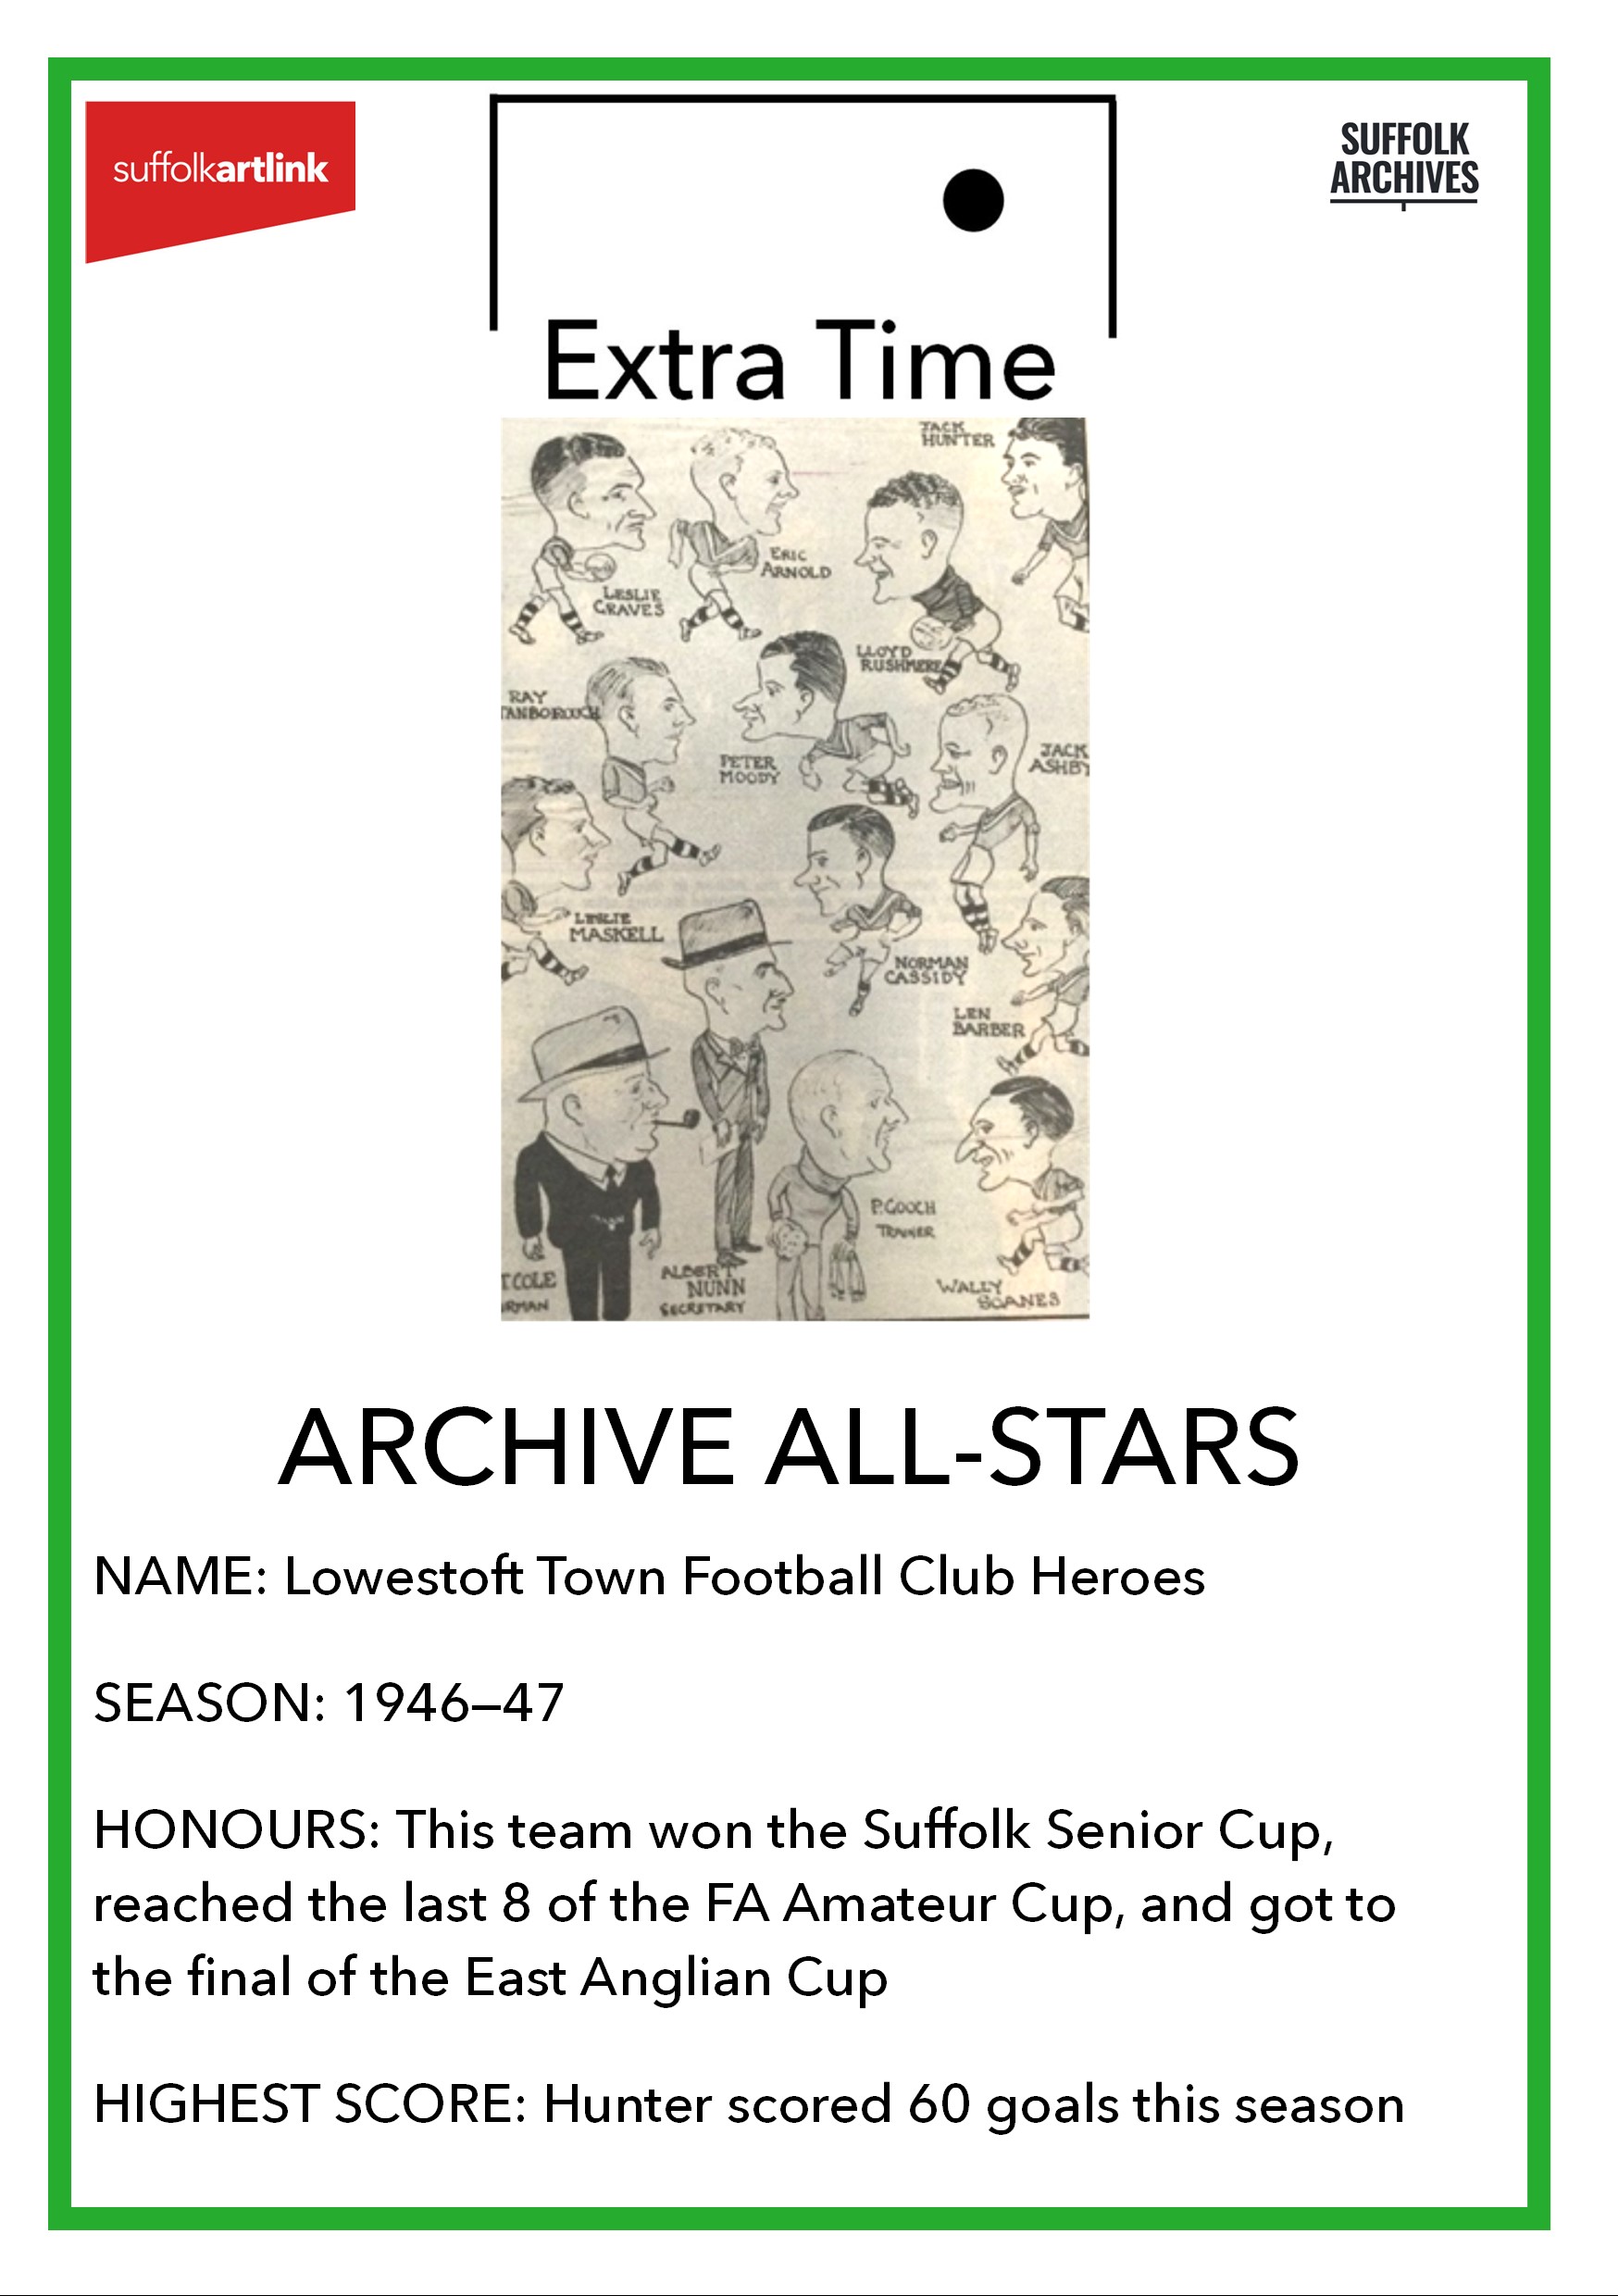 A cartoon of football players and text Extra Time Archive All-Stars, name Lowestoft Town Football Club Heroes, Season, 1946-47, Honours, this team won the Suffolk Senior Cup, reached the last 8 of the FA Amateur Cup and got to the final of the East Anglian Cup, Highest score, Hunter scored 60 goals this season